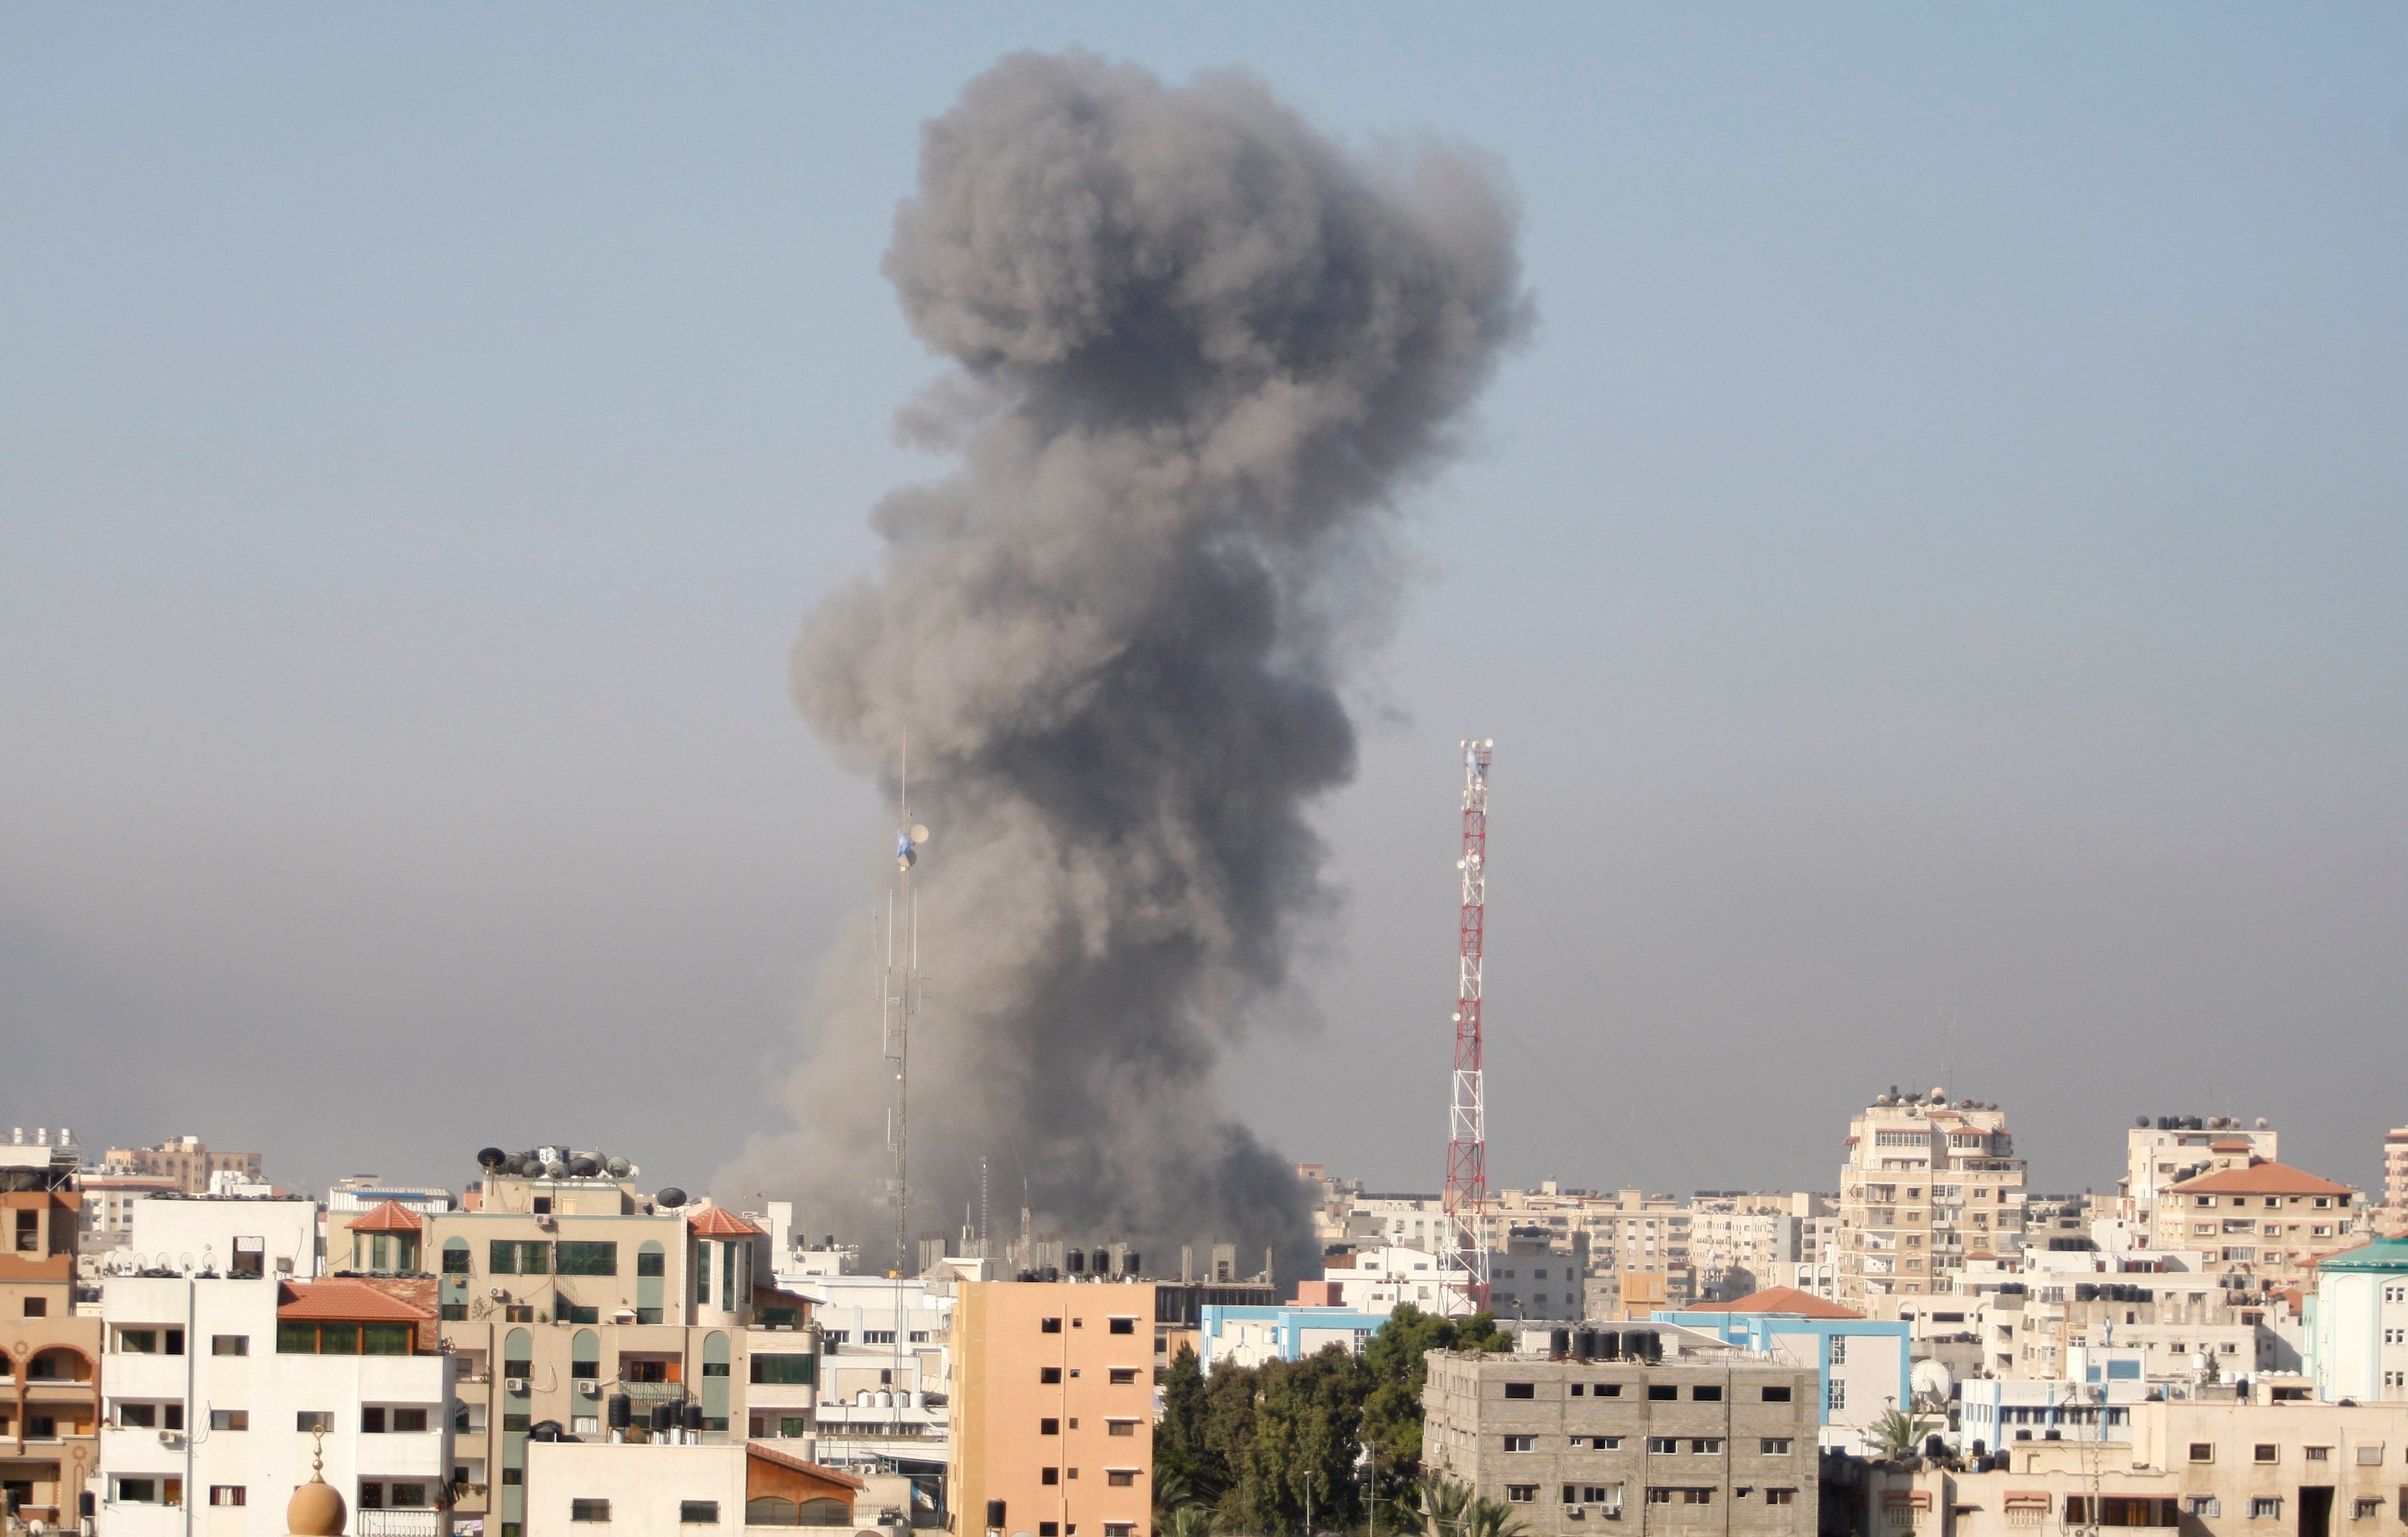 Smoke rises following what witnesses said was an Israeli air strike in Gaza City July 30, 2014. Israeli fire killed at least 43 Palestinians in the Gaza Strip early on Wednesday as the Jewish state said it targeted Islamist militants at dozens of sites across the coastal enclave, while Egyptian mediators prepared a revised ceasefire proposal. Photo: Reuters